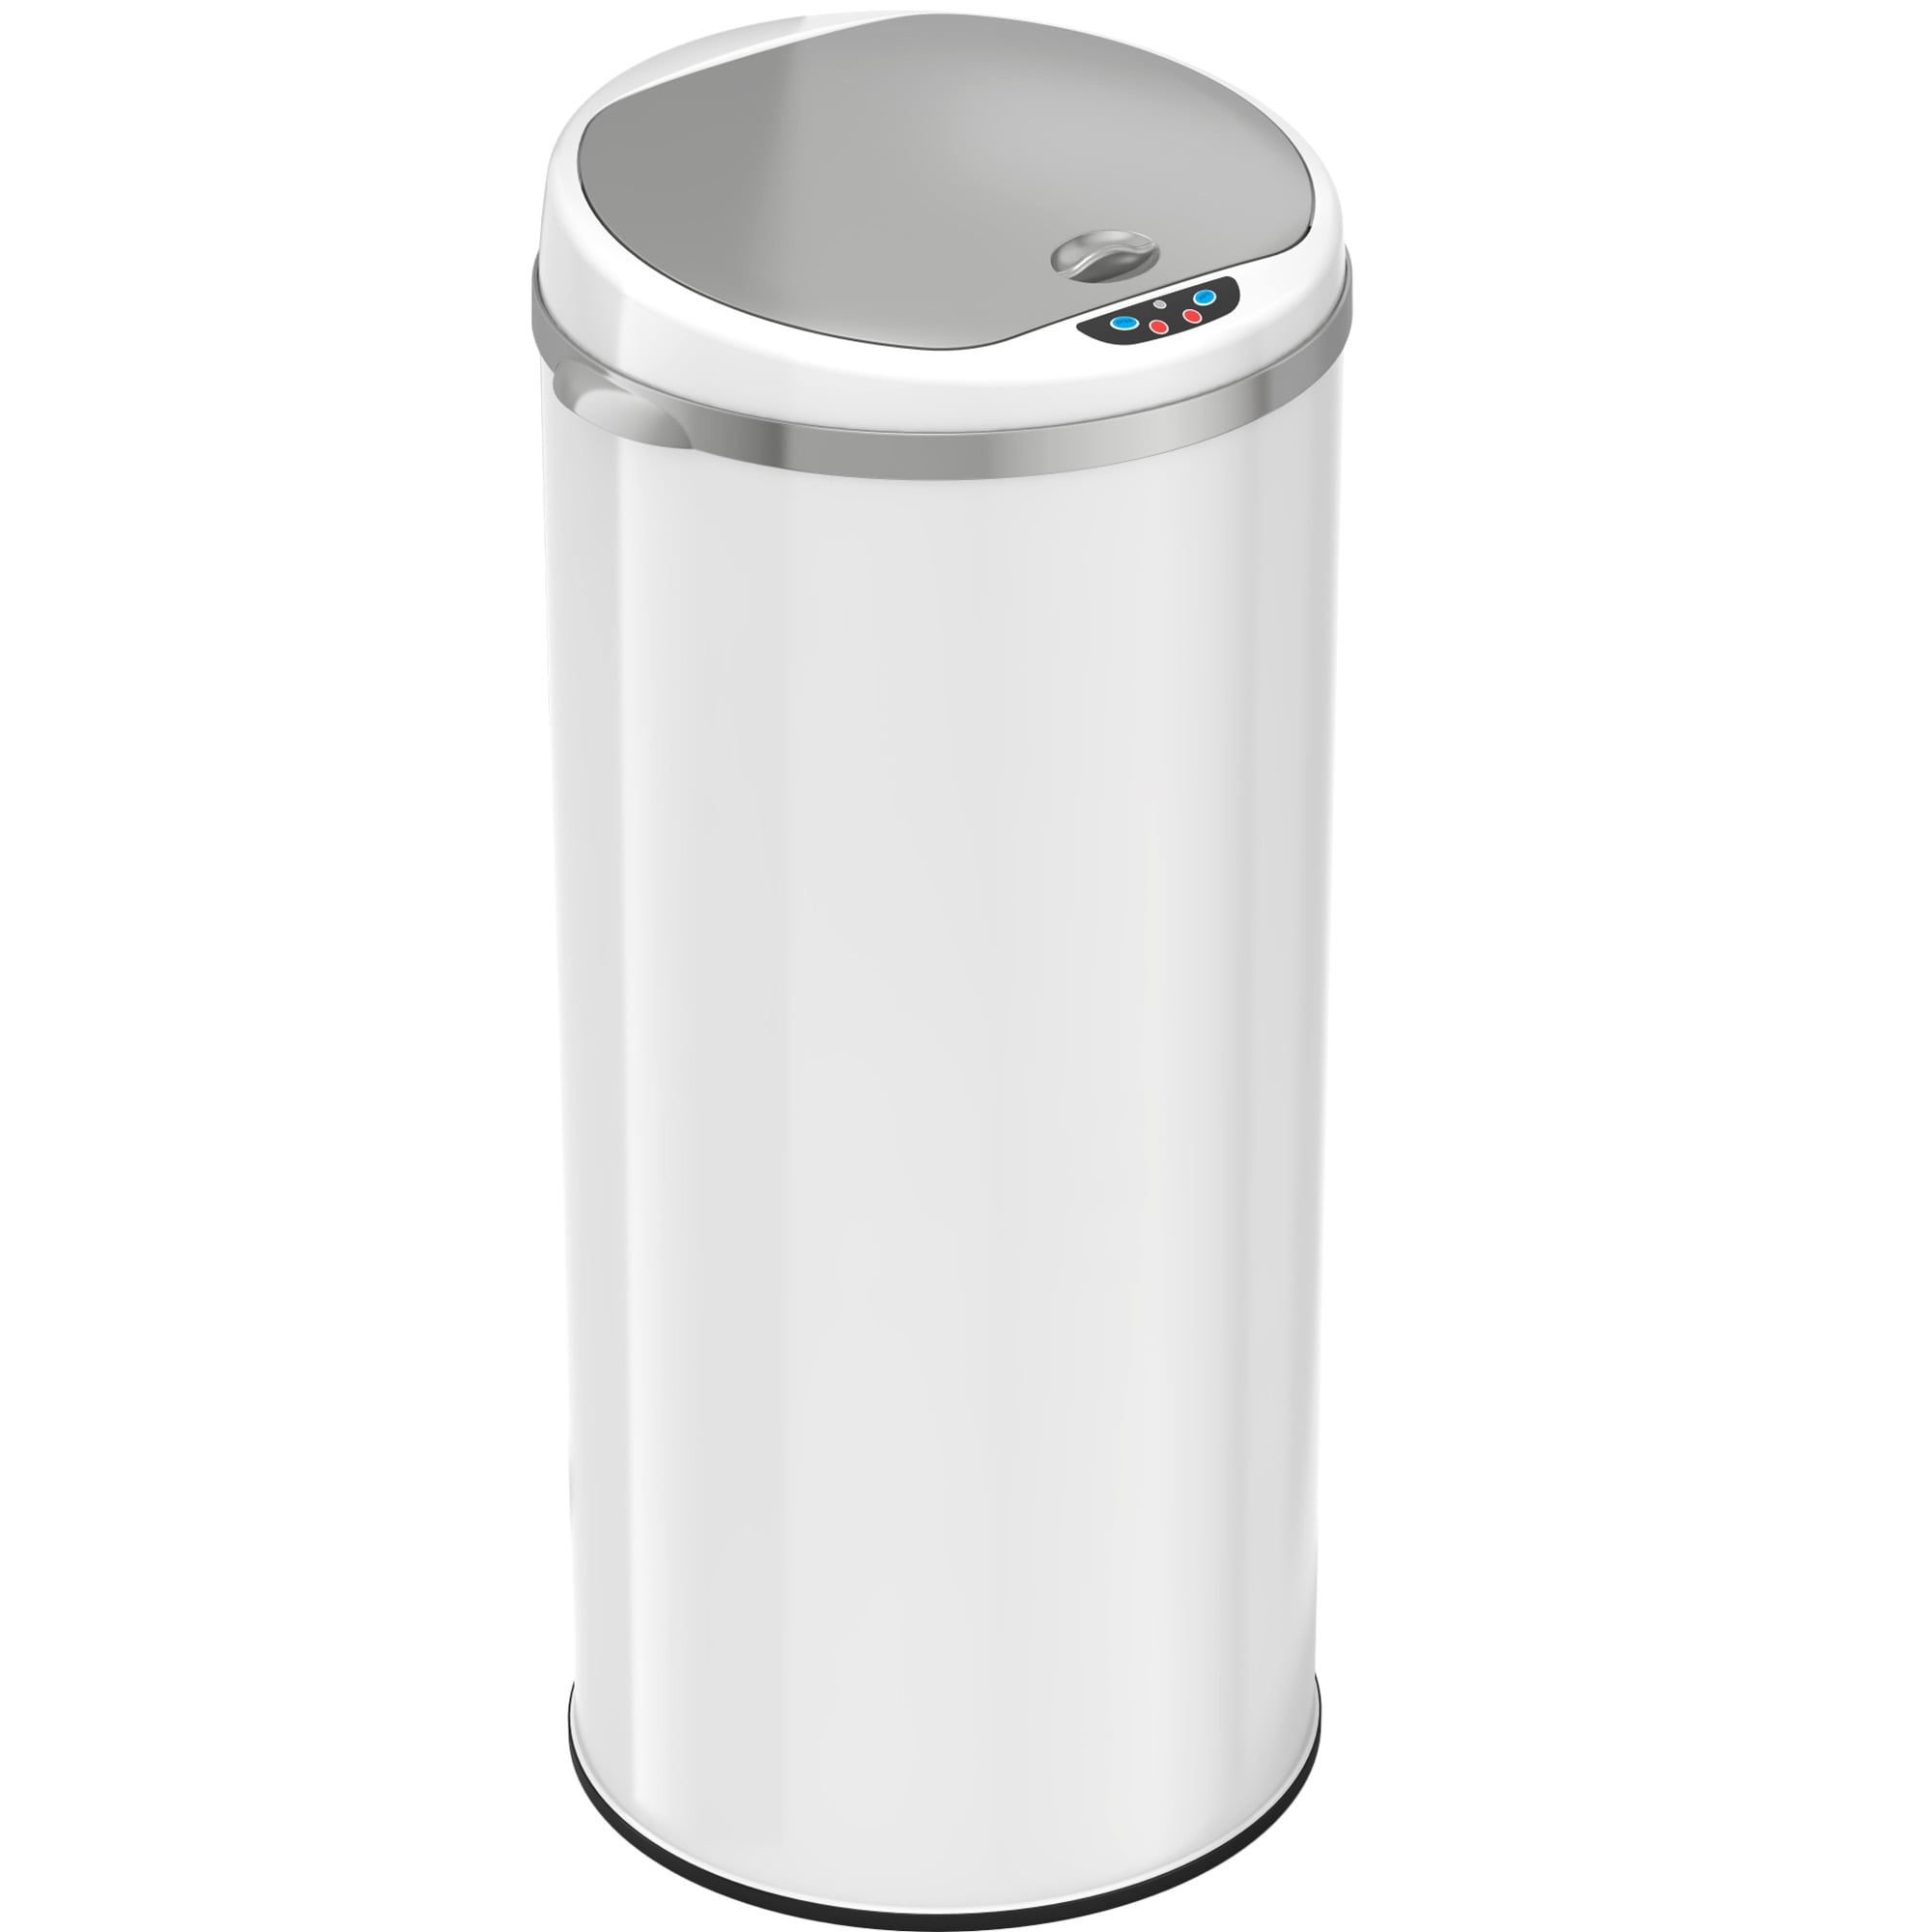 Payhere Kitchen Trash Can for Bathroom Office Home Stainless Steel Oval Shape Automatic Sensor 50L Commercial Garbage Bin Mute Design Silver 13 Gallon Touchless Waste Container with Lid Brushed